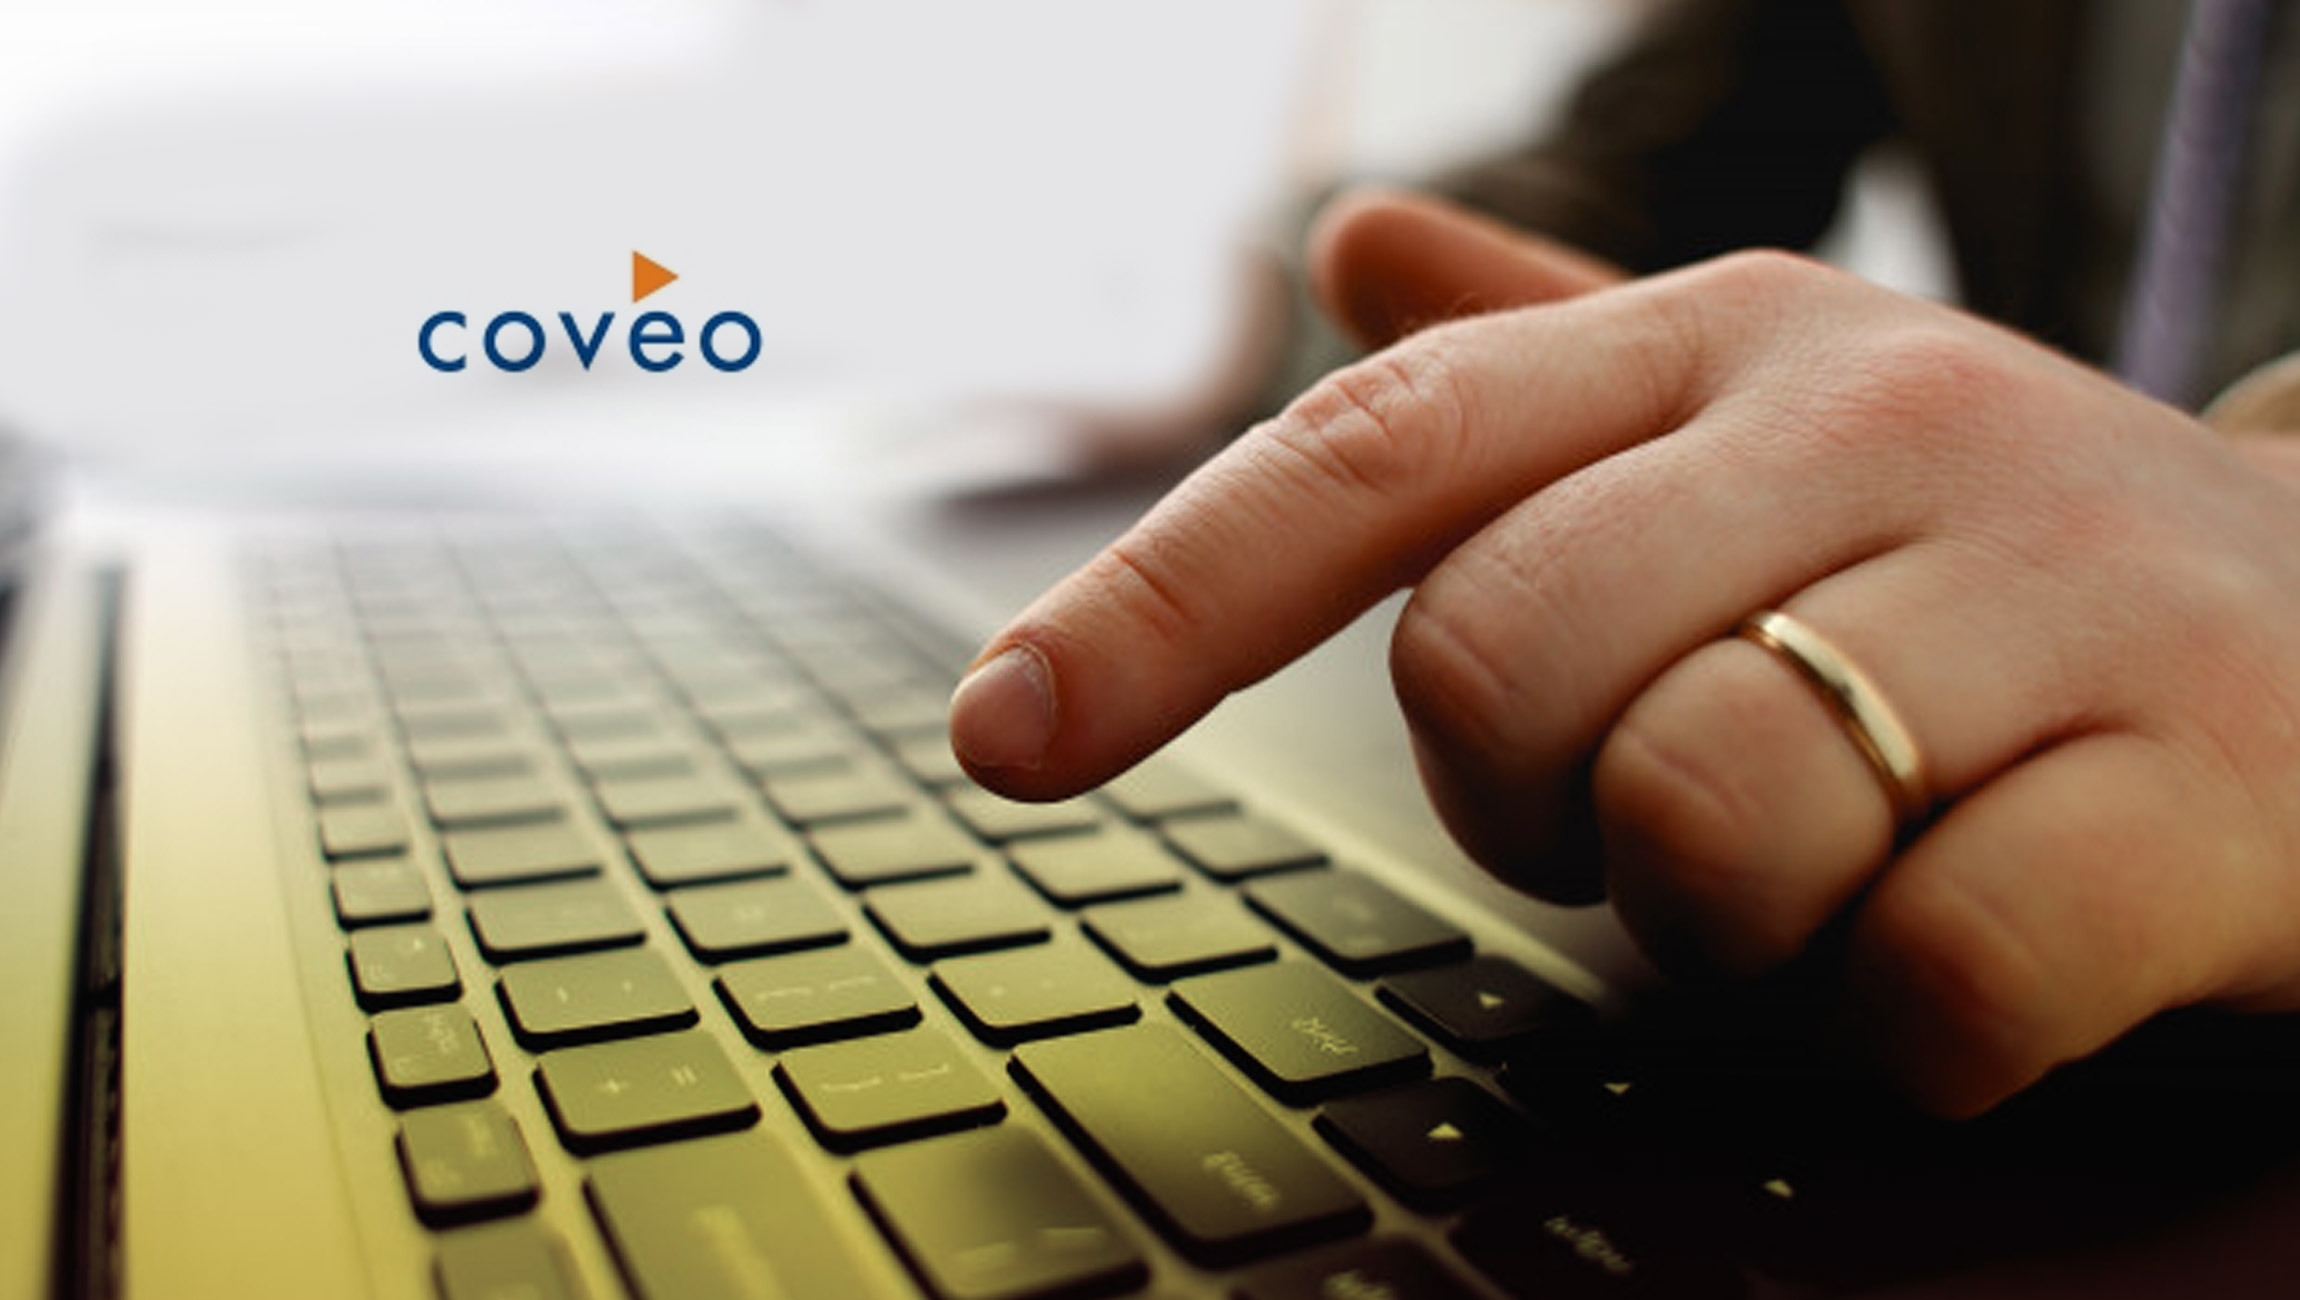 Coveo and commercetools Offer Flexible, Powerful Ecommerce to Provide the Best Experiences for Customers